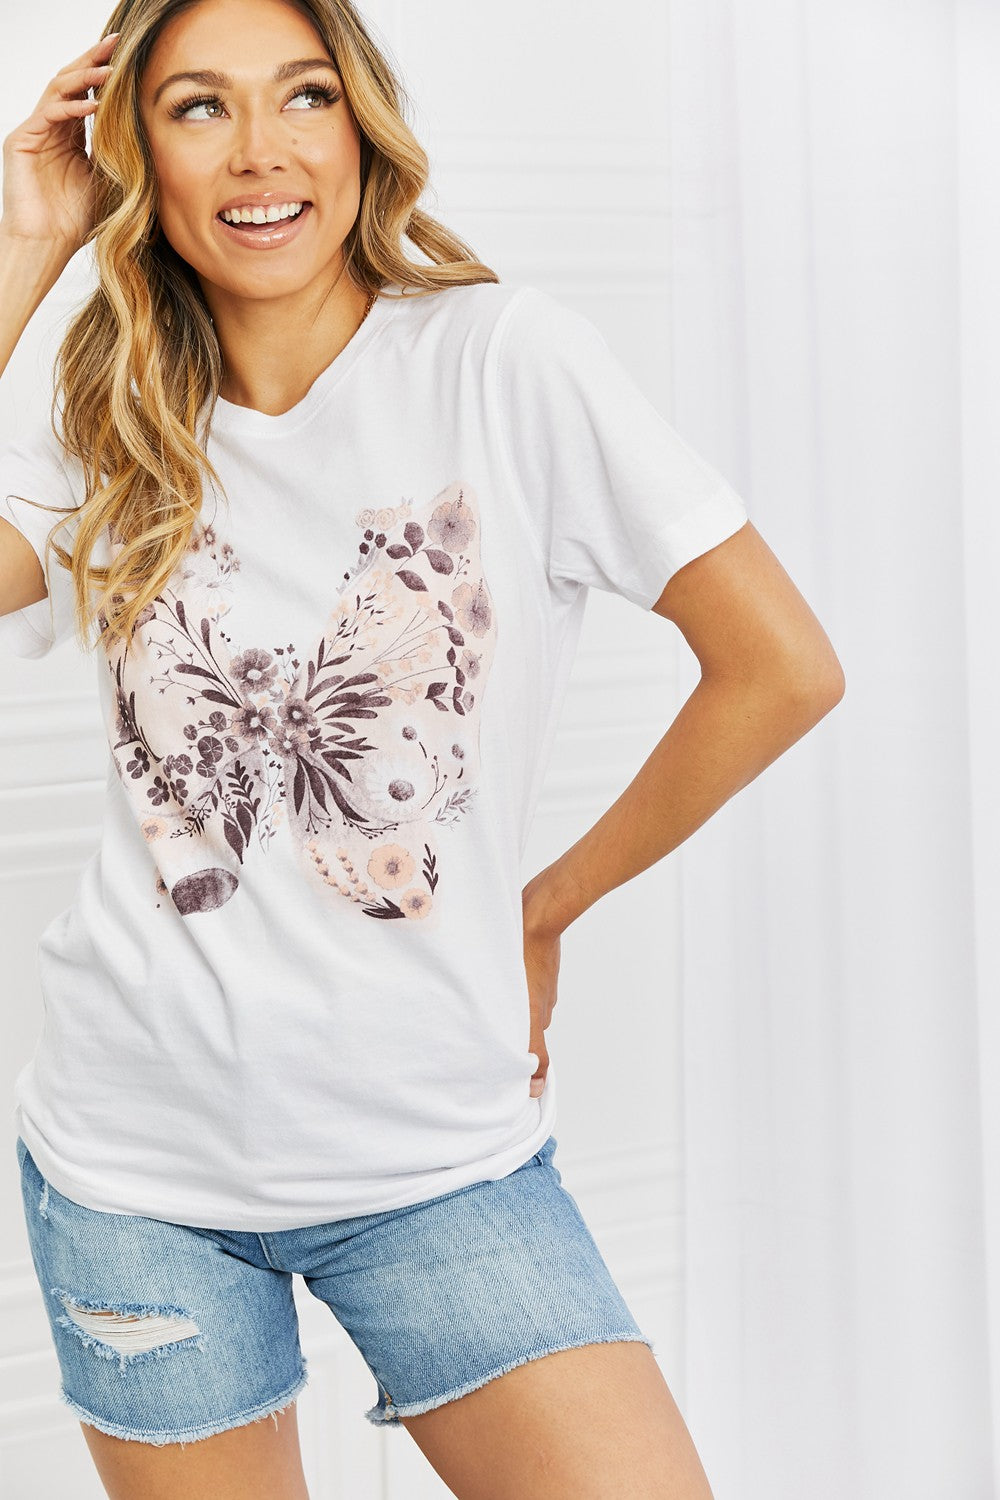 You Give Me Butterflies Graphic Tee